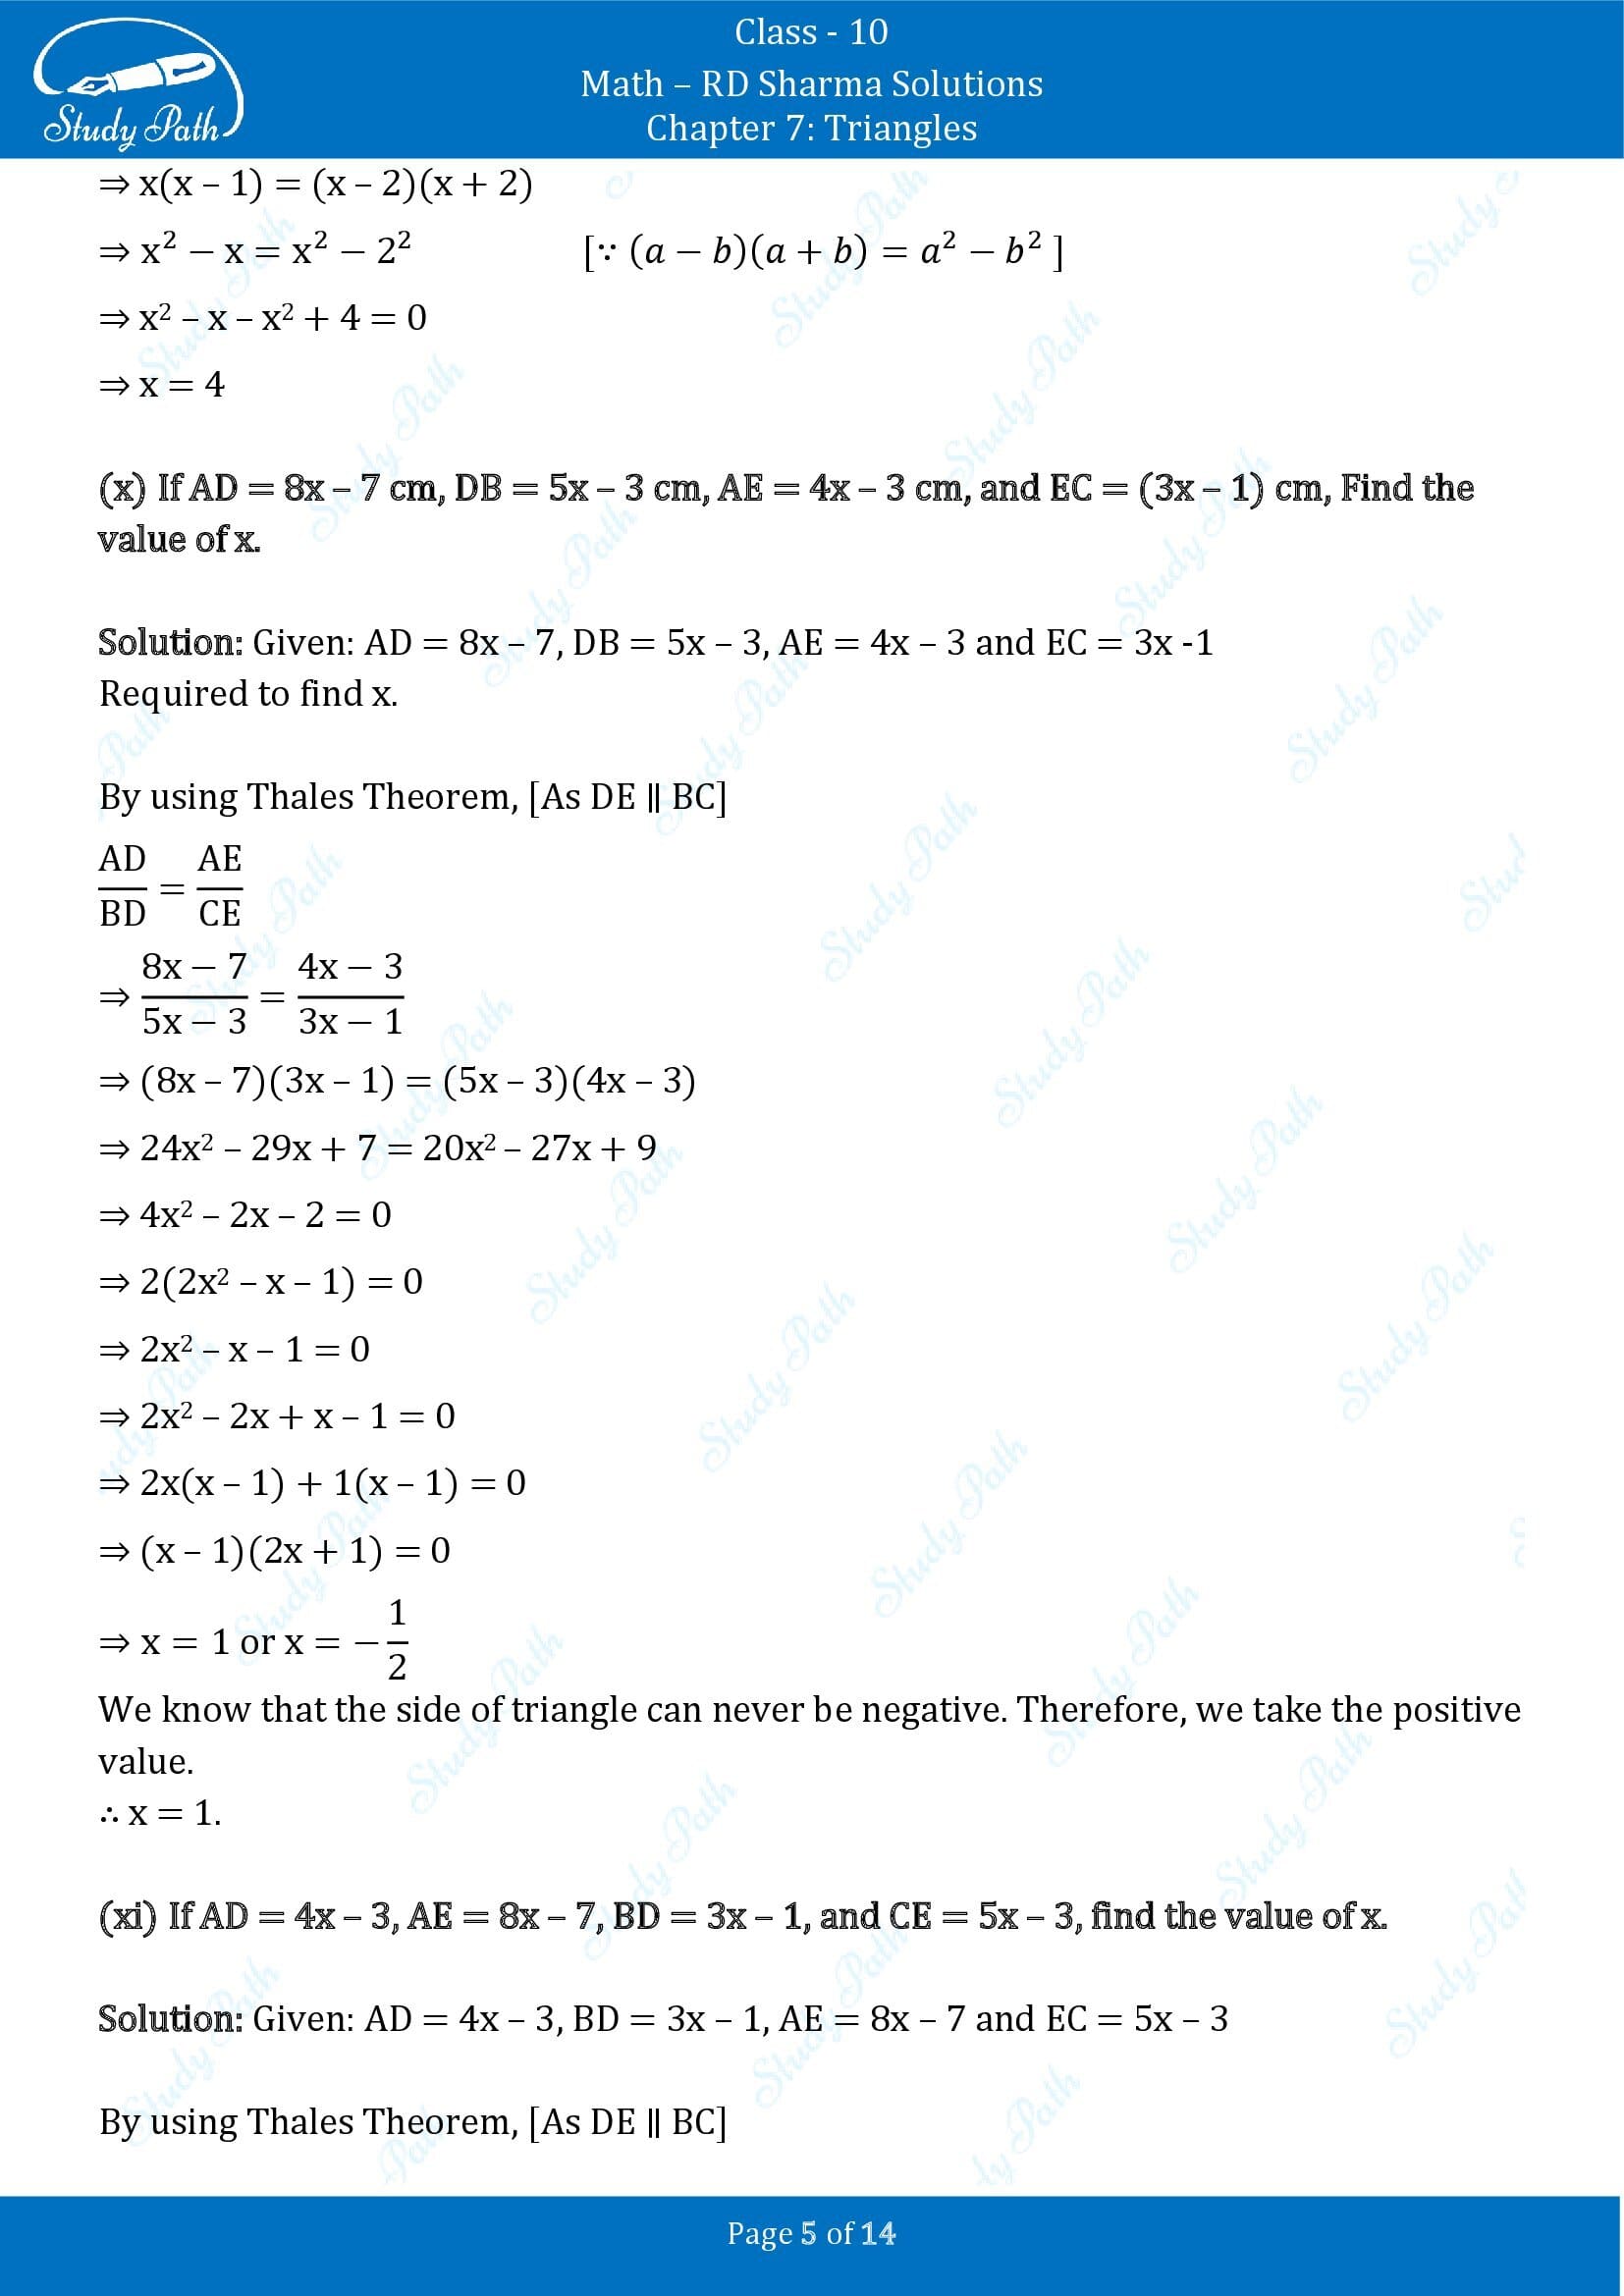 RD Sharma Solutions Class 10 Chapter 7 Triangles Exercise 7.2 00005